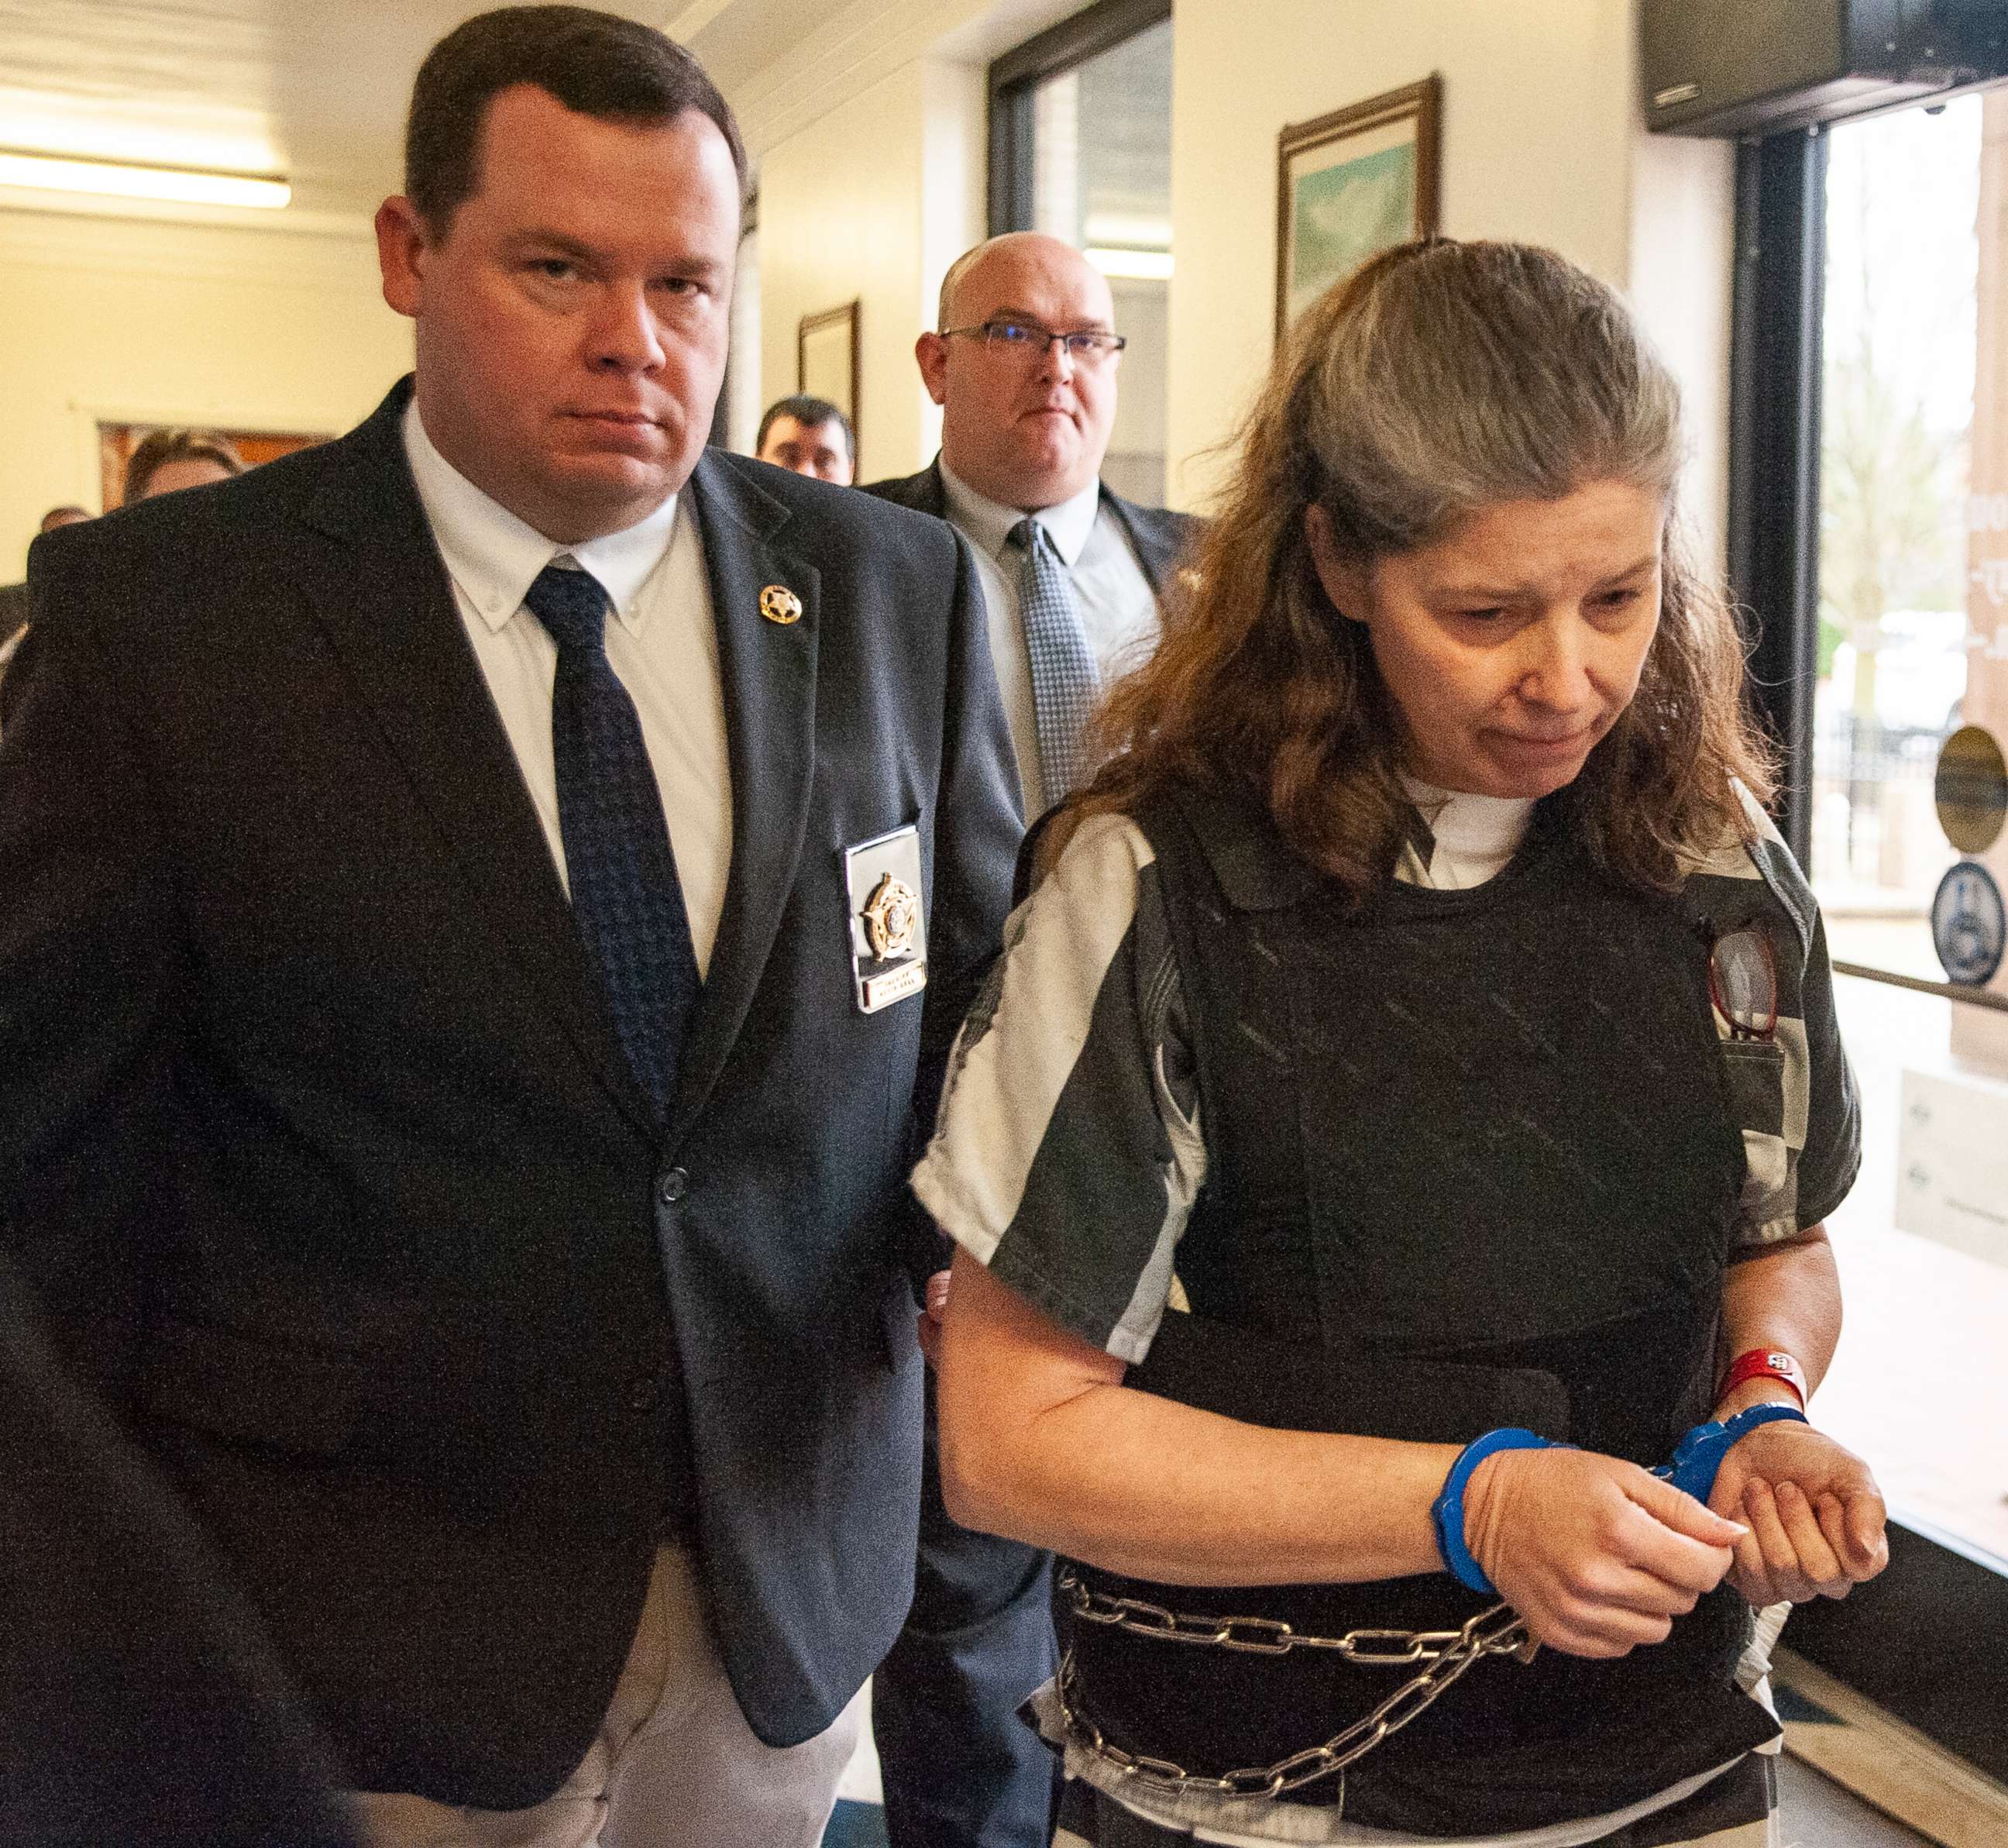 PHOTO: Rebecca O'Donnell is escorted down a hallway by Randolph County Sheriff Kevin Bell after a hearing on Wednesday, Jan. 29, 2020, at the Randolph County Courthouse in Pocahontas, Ark.